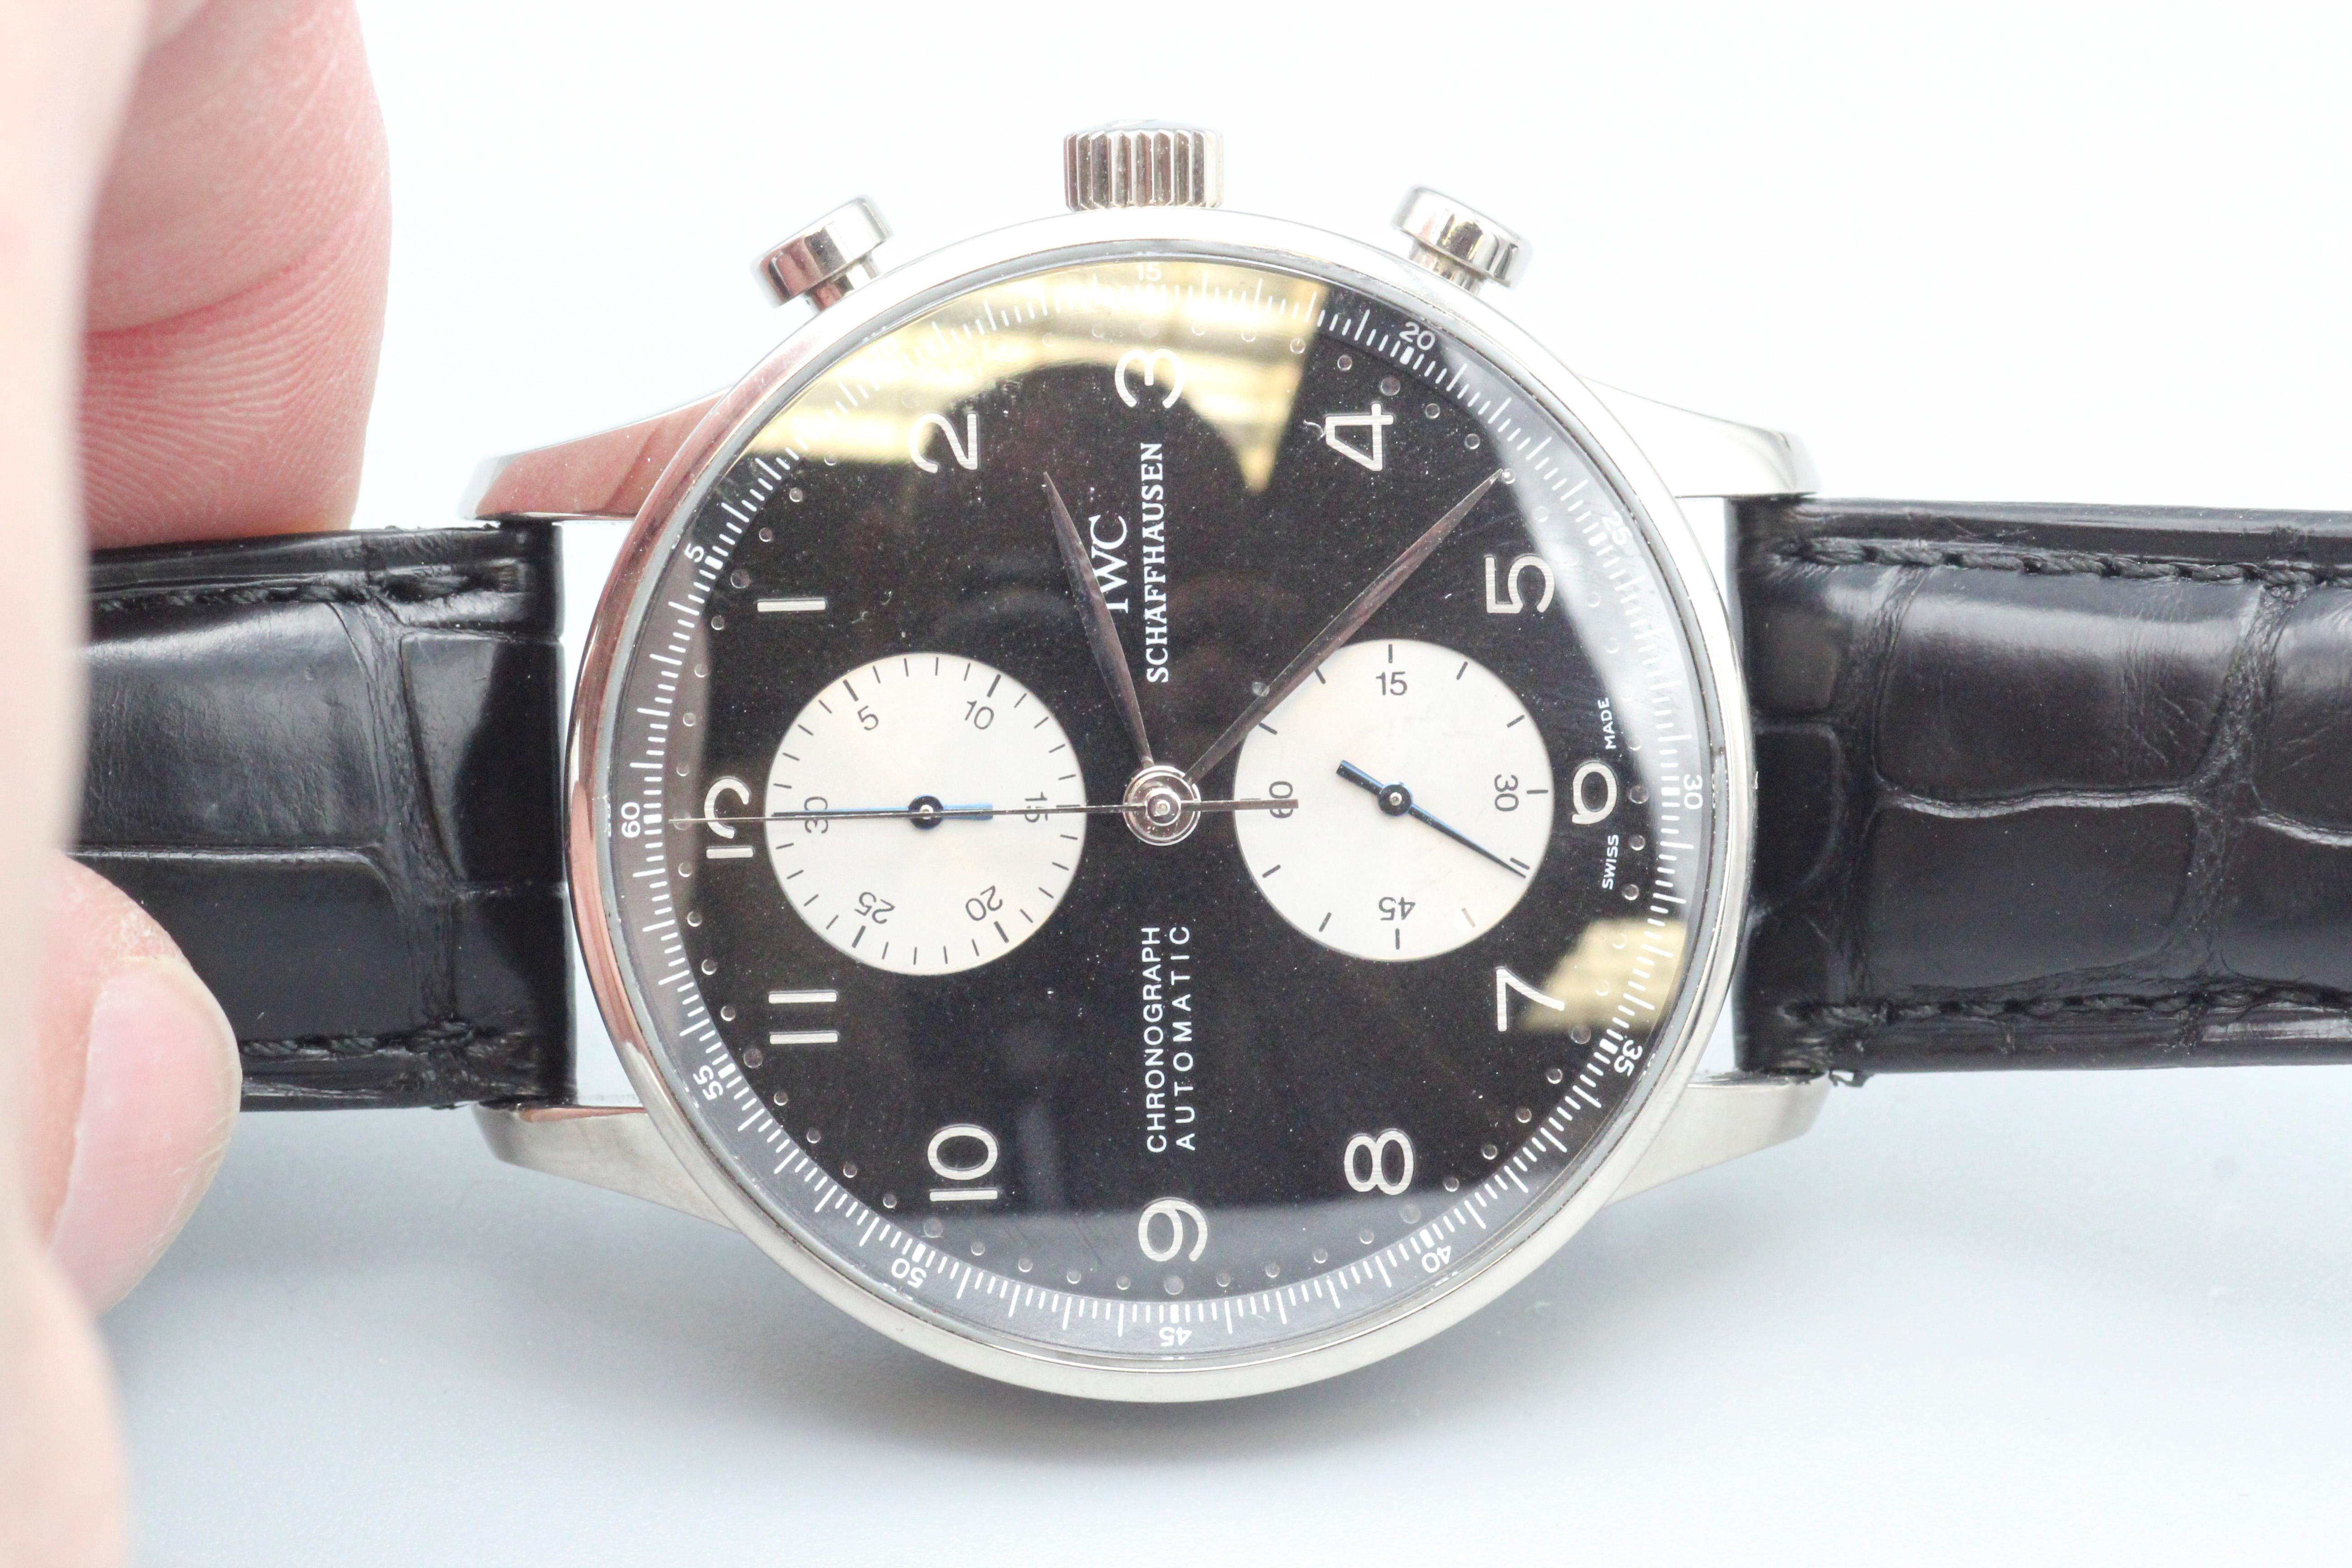 IWC Portugieser 18k White Gold Chronograph Wristwatch with rare Panda Dial For Sale 8